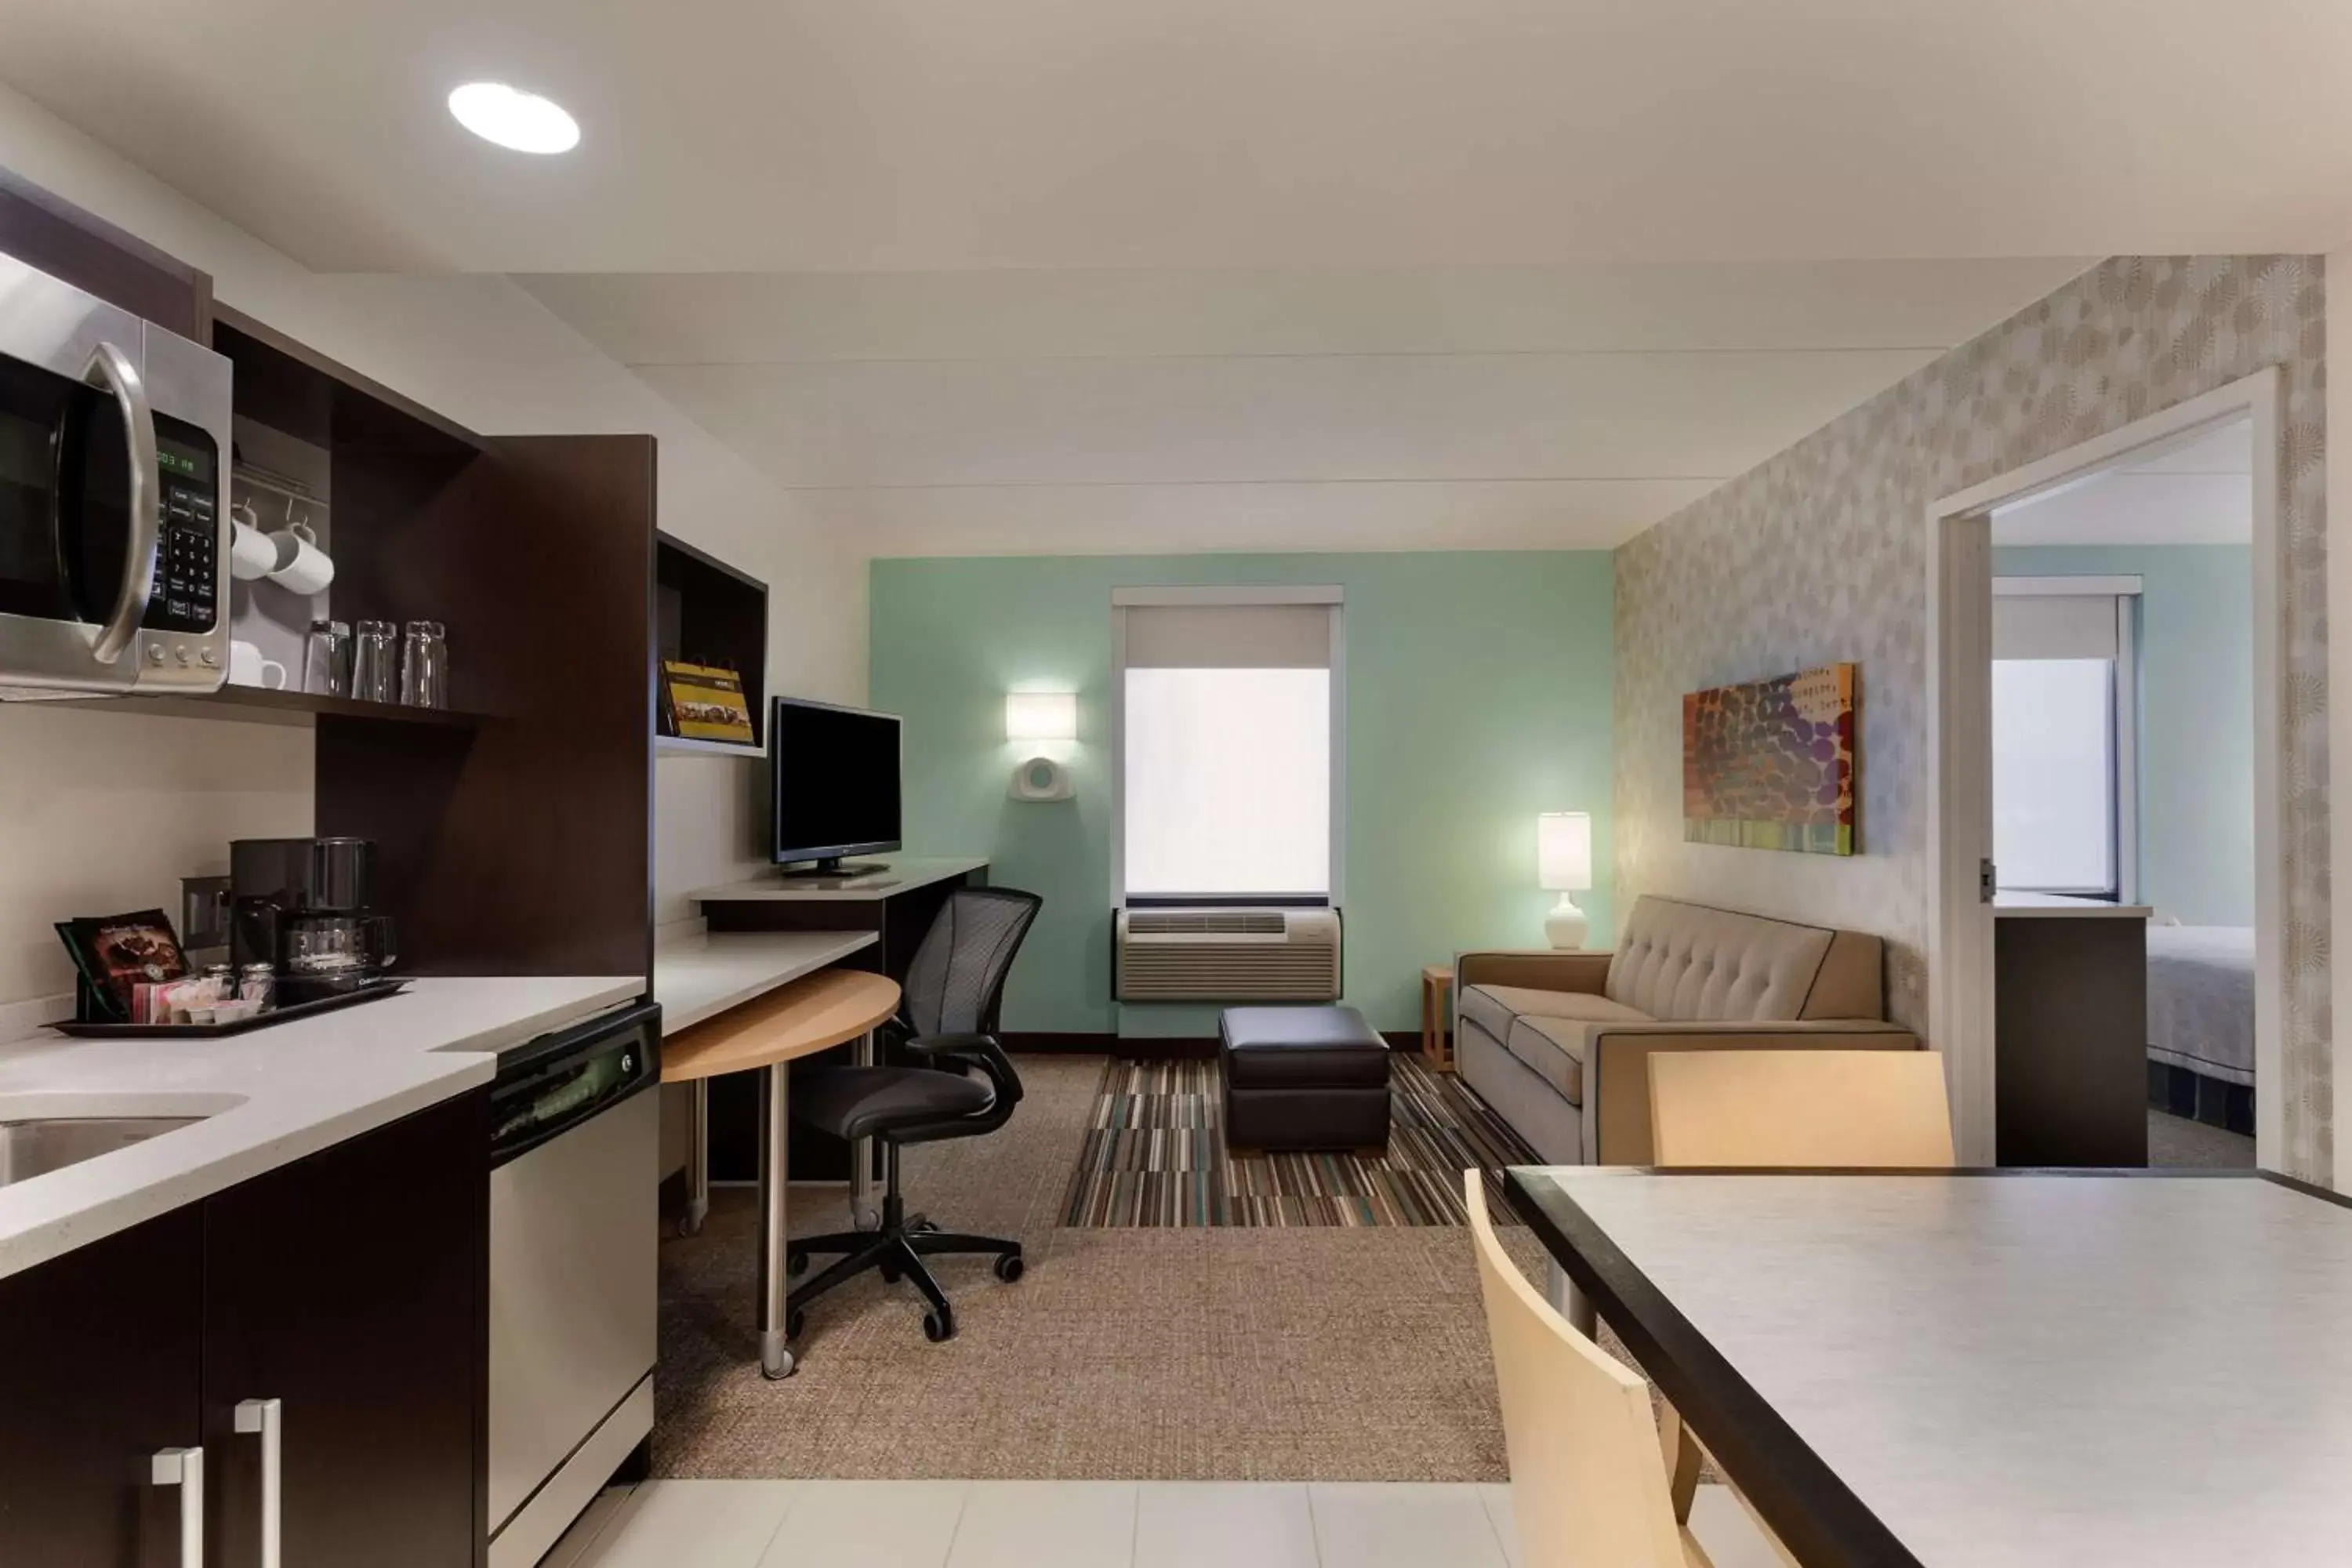 Bedroom in Home2 Suites by Hilton Philadelphia Convention Center